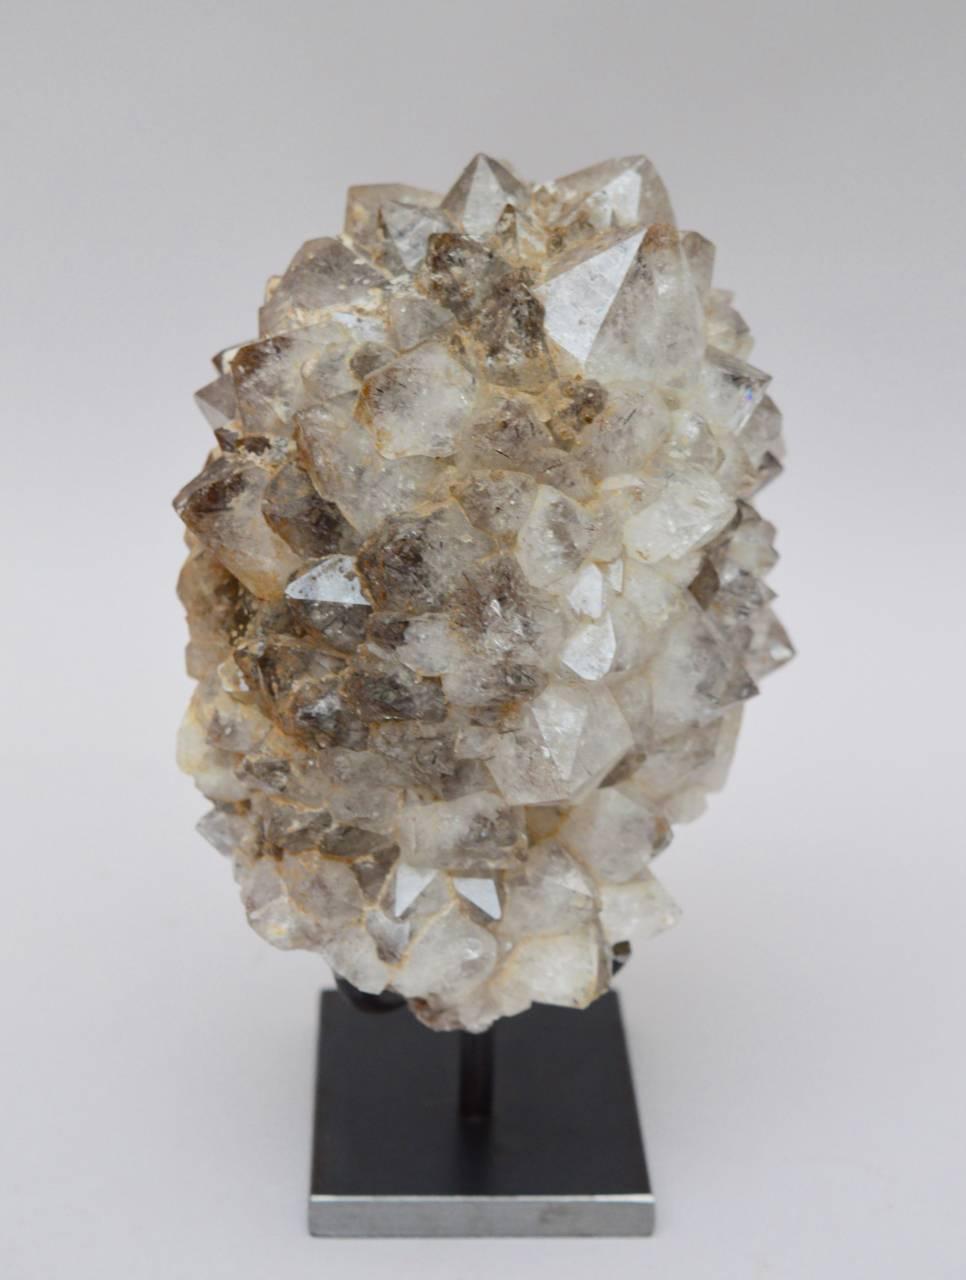 This natural tourmalinated quartz specimen is mounted on a custom-made ready for display.